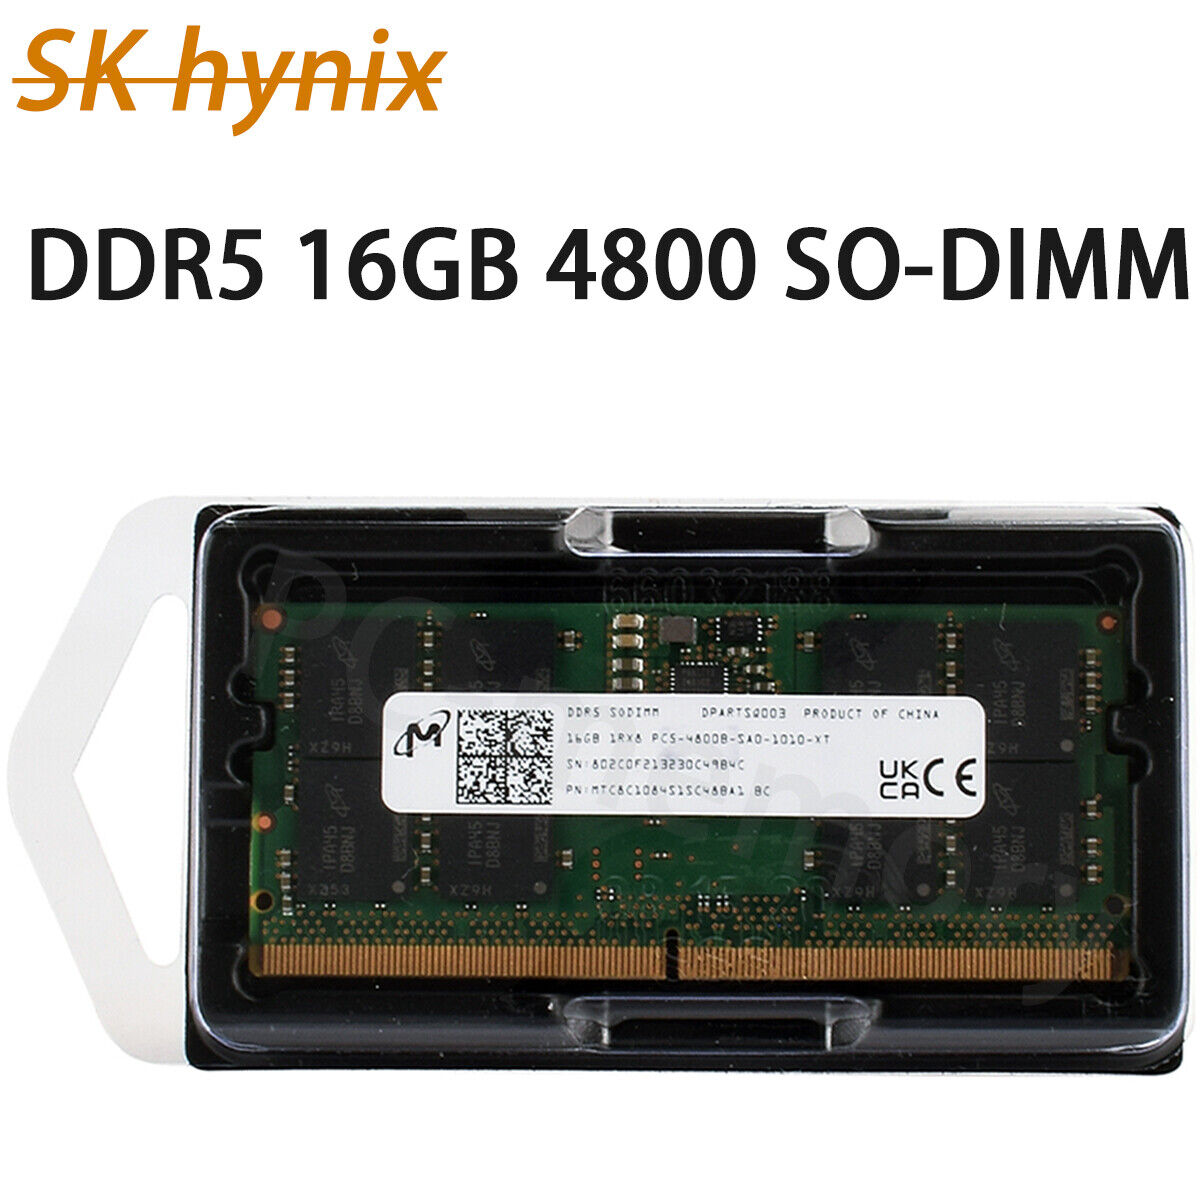 SK hynix 8GB 16GB 32GB DDR5 SO-DIMM 5600/4800 MHz Laptop Memory for HP Dell lot